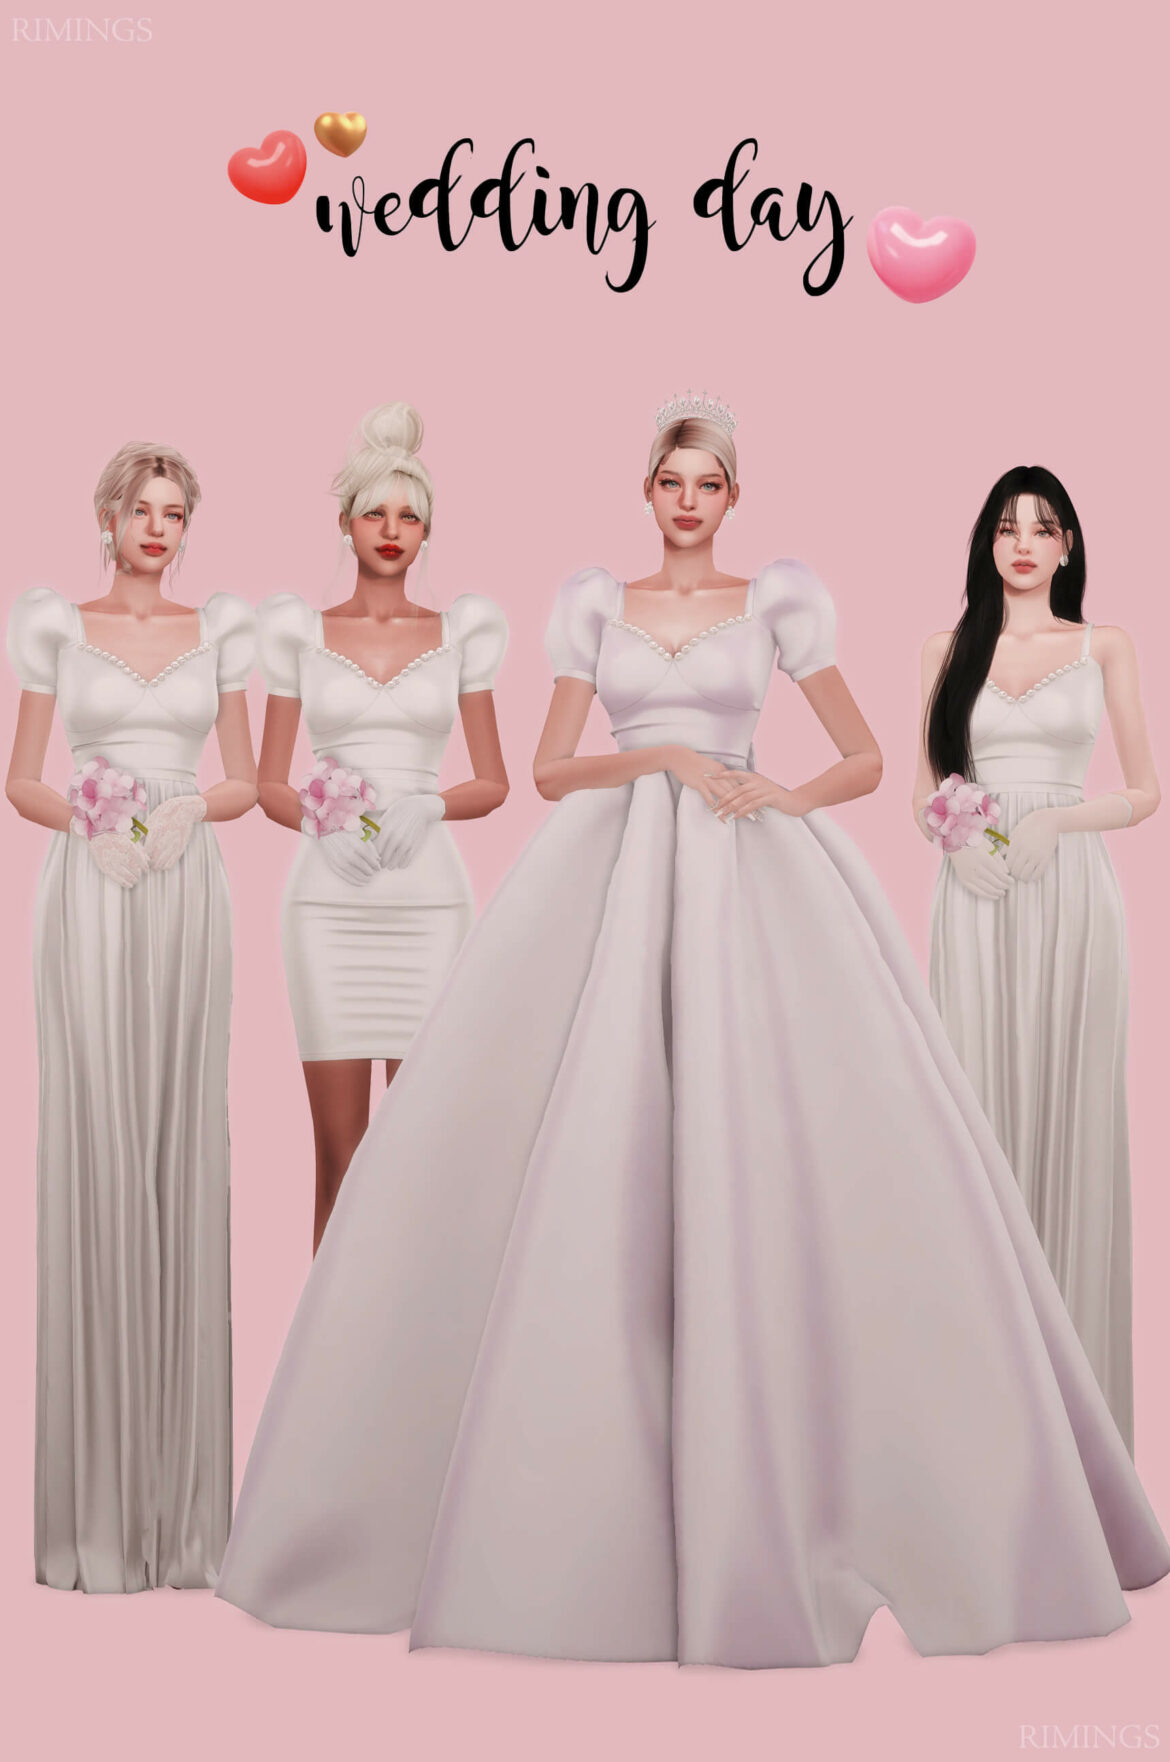 rimings wedding day collection full body - The Sims Guide